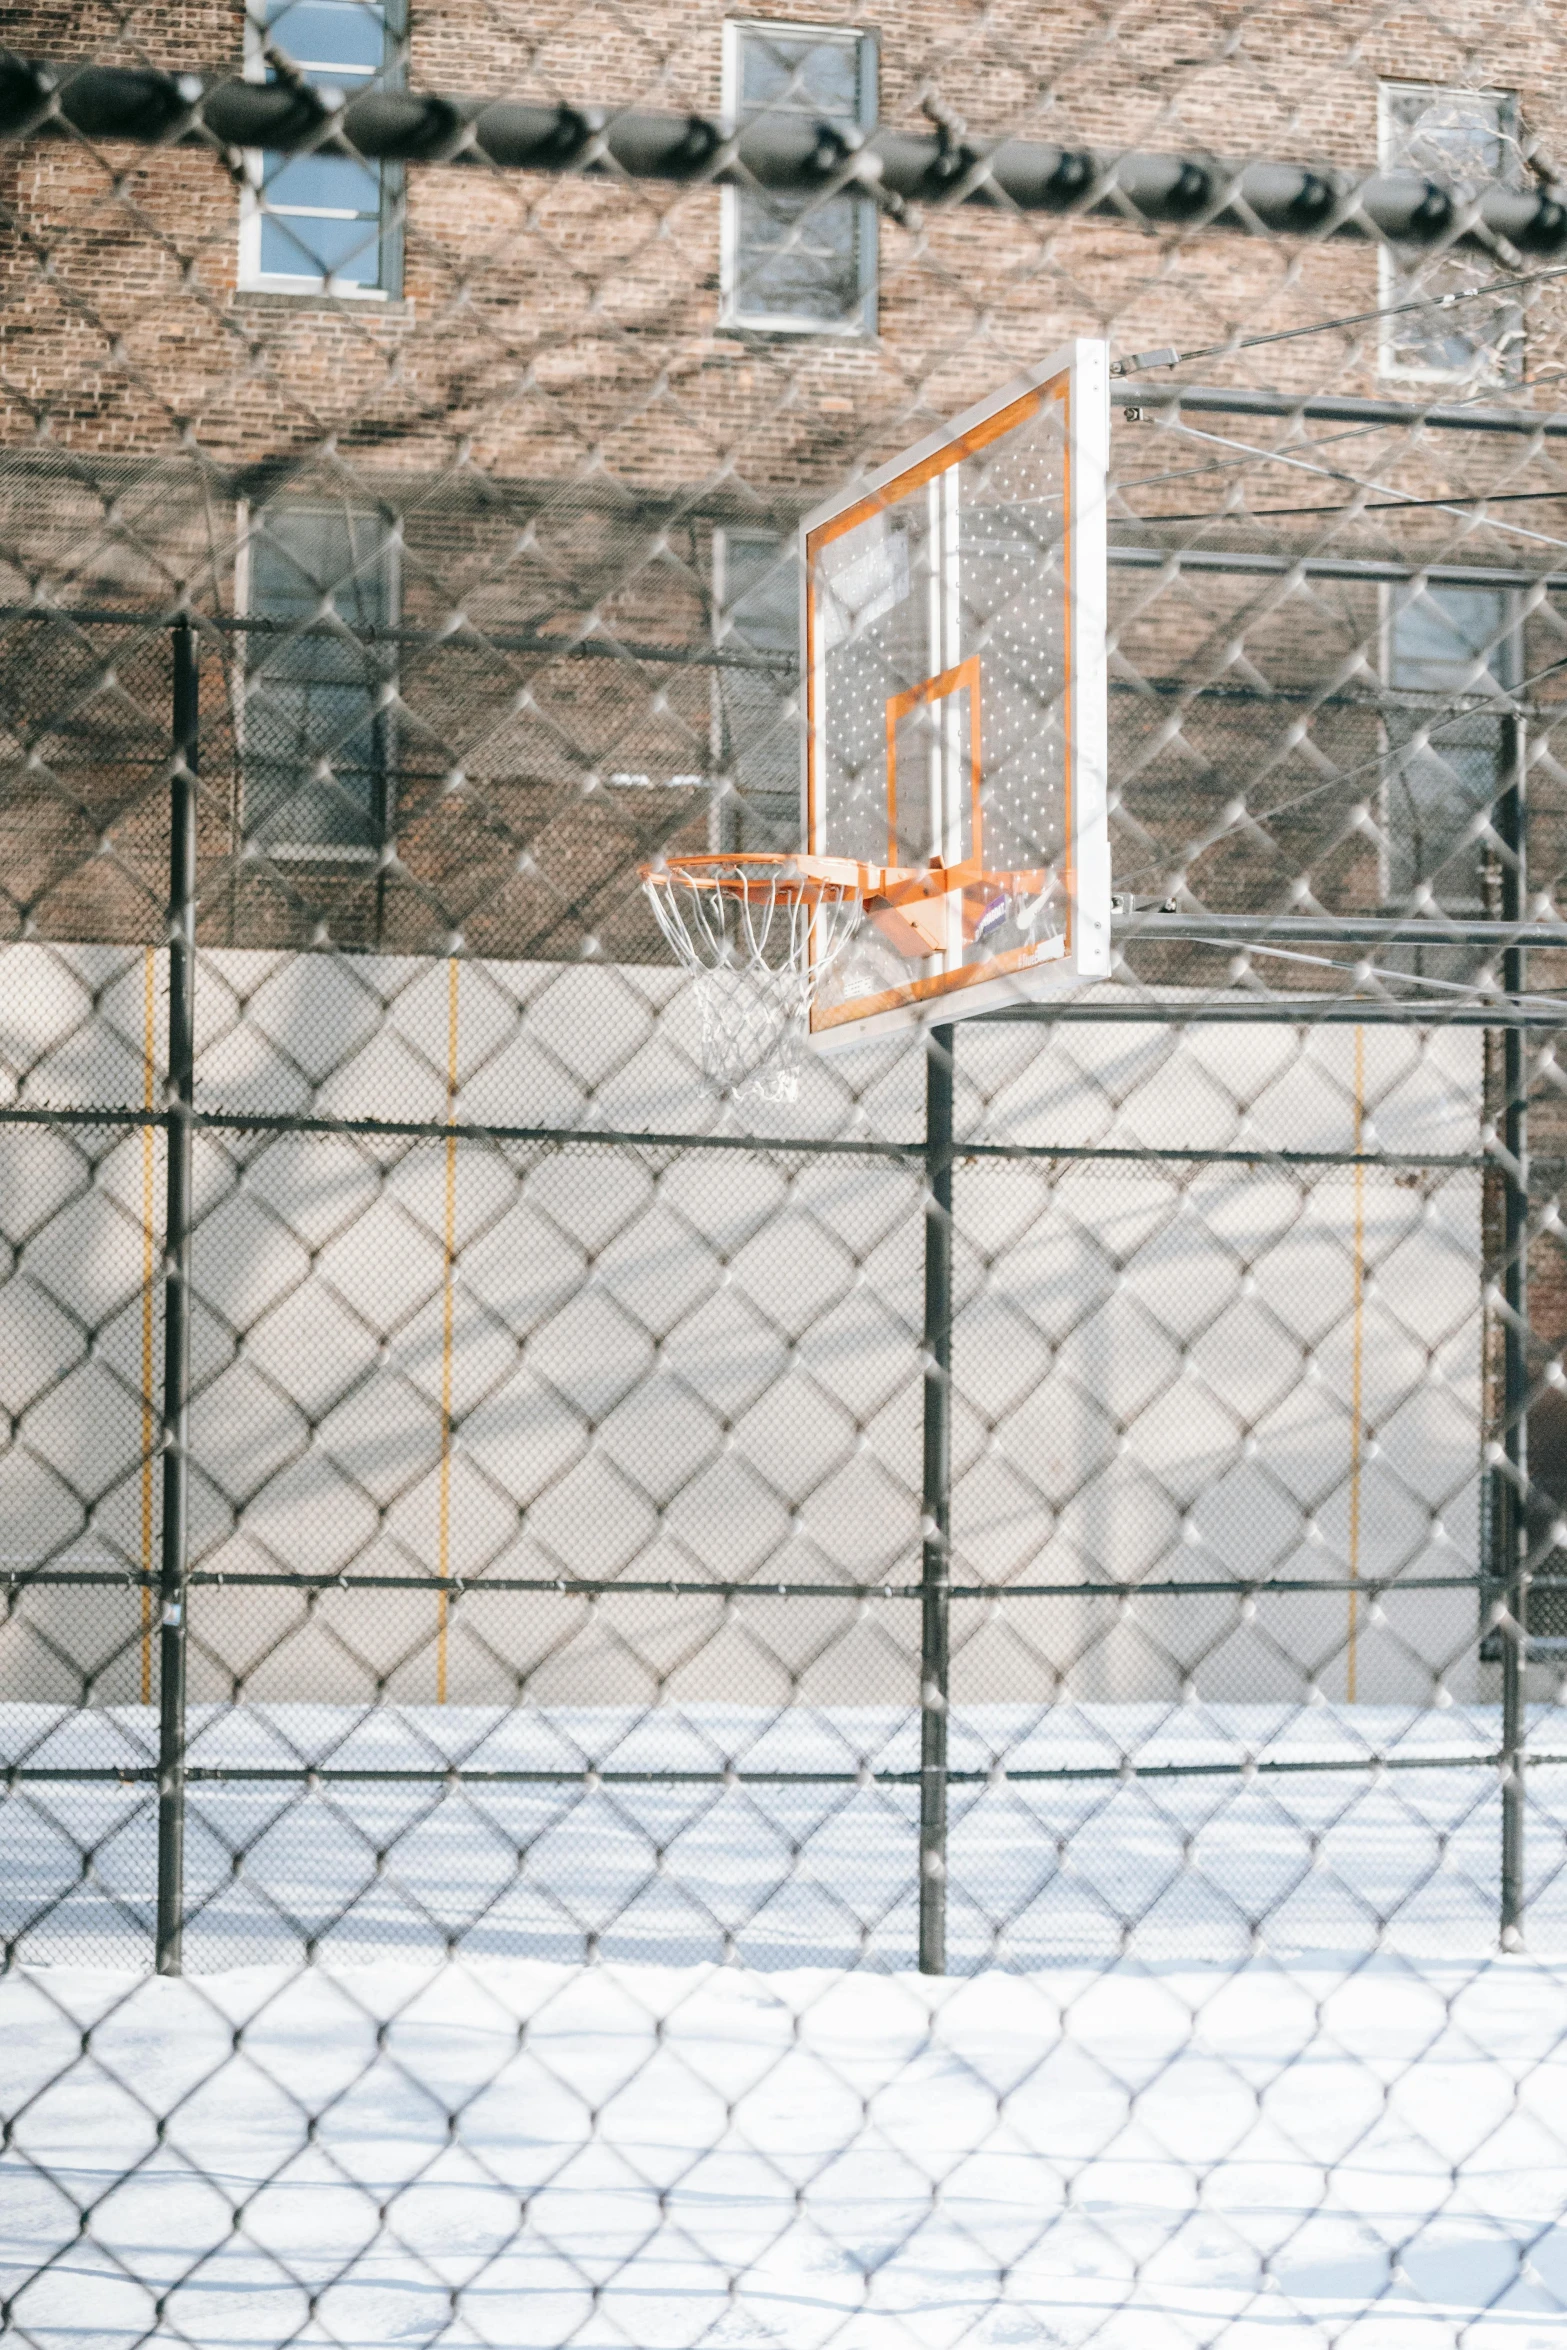 a basketball court surrounded by a chain link fence, by Dan Scott, square, shot from a distance, freeze frame, jamel shabazz